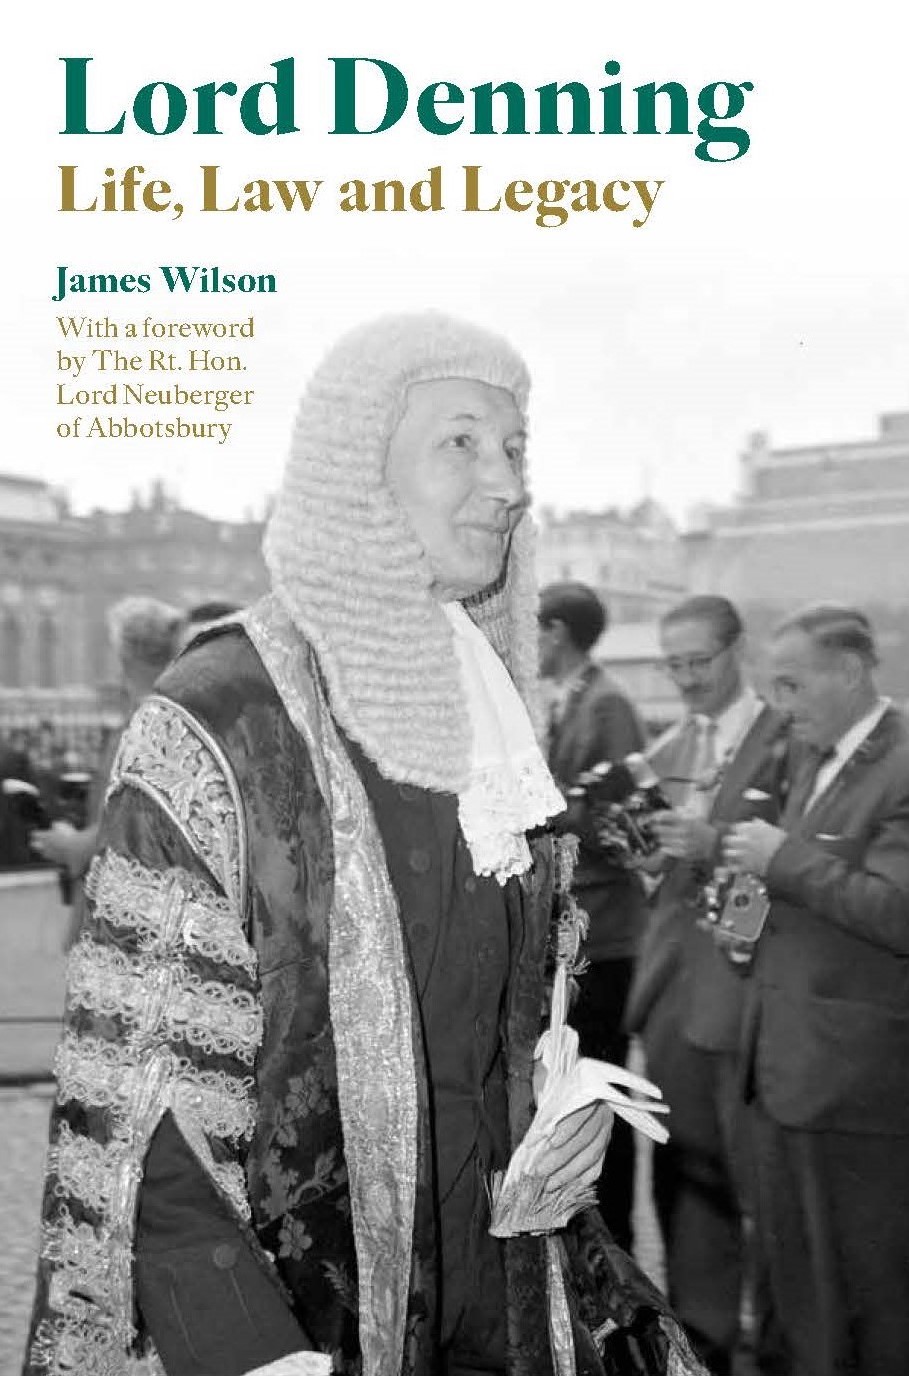 Review: Lord Denning: Life, Law and Legacy